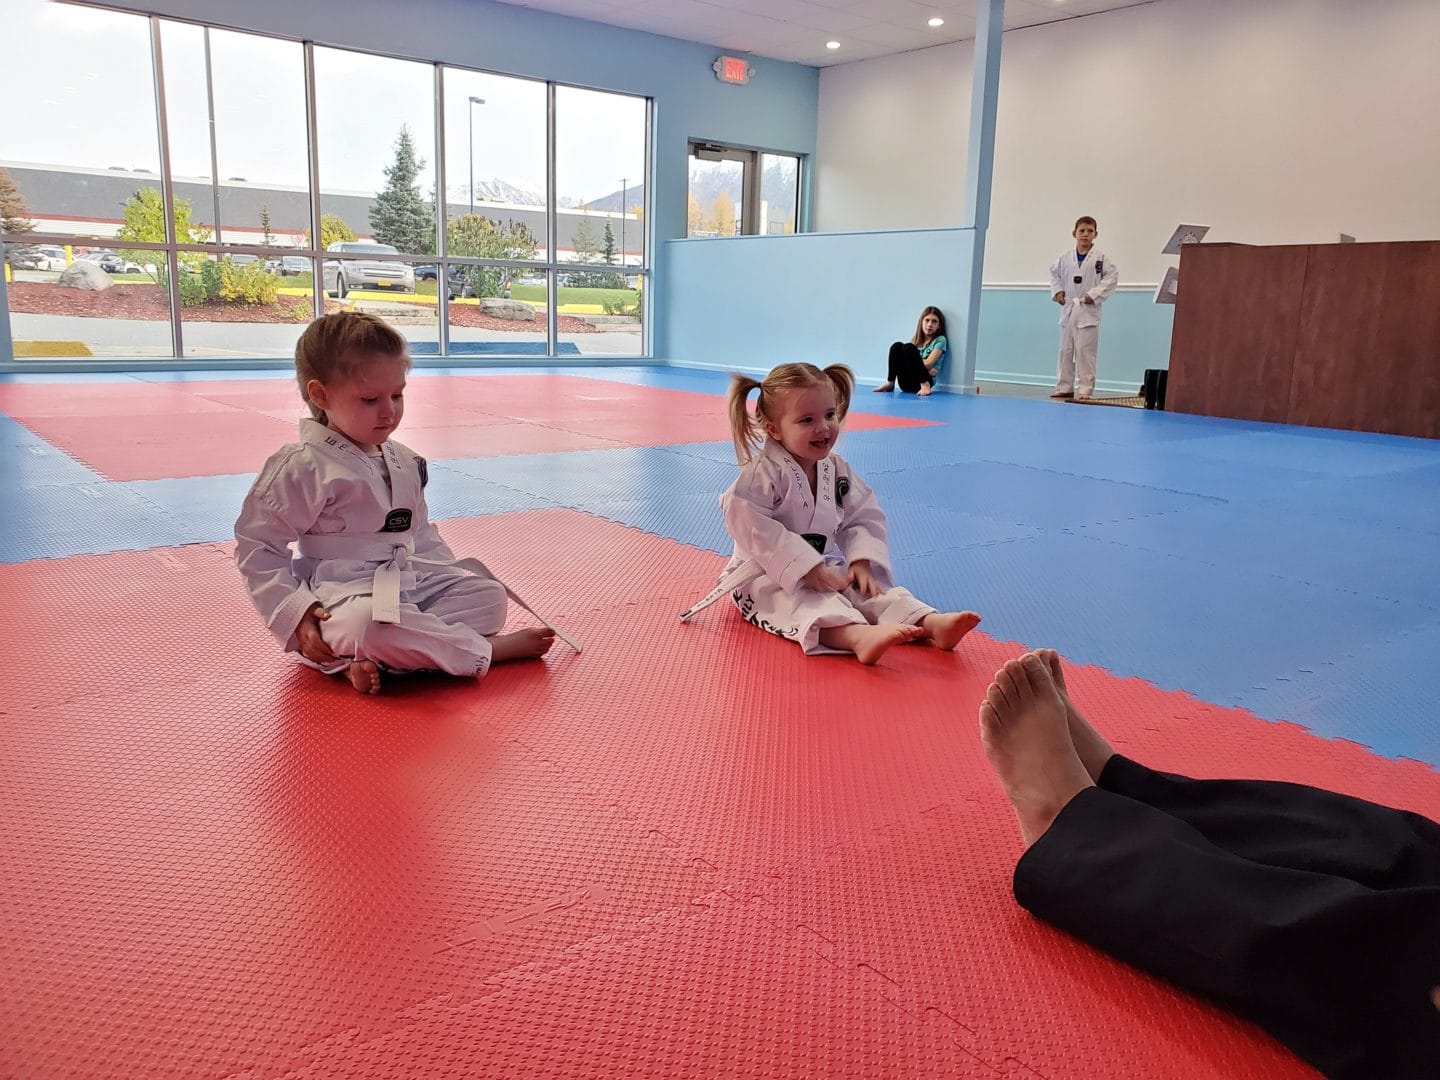 Two young students having fun learning from instructor